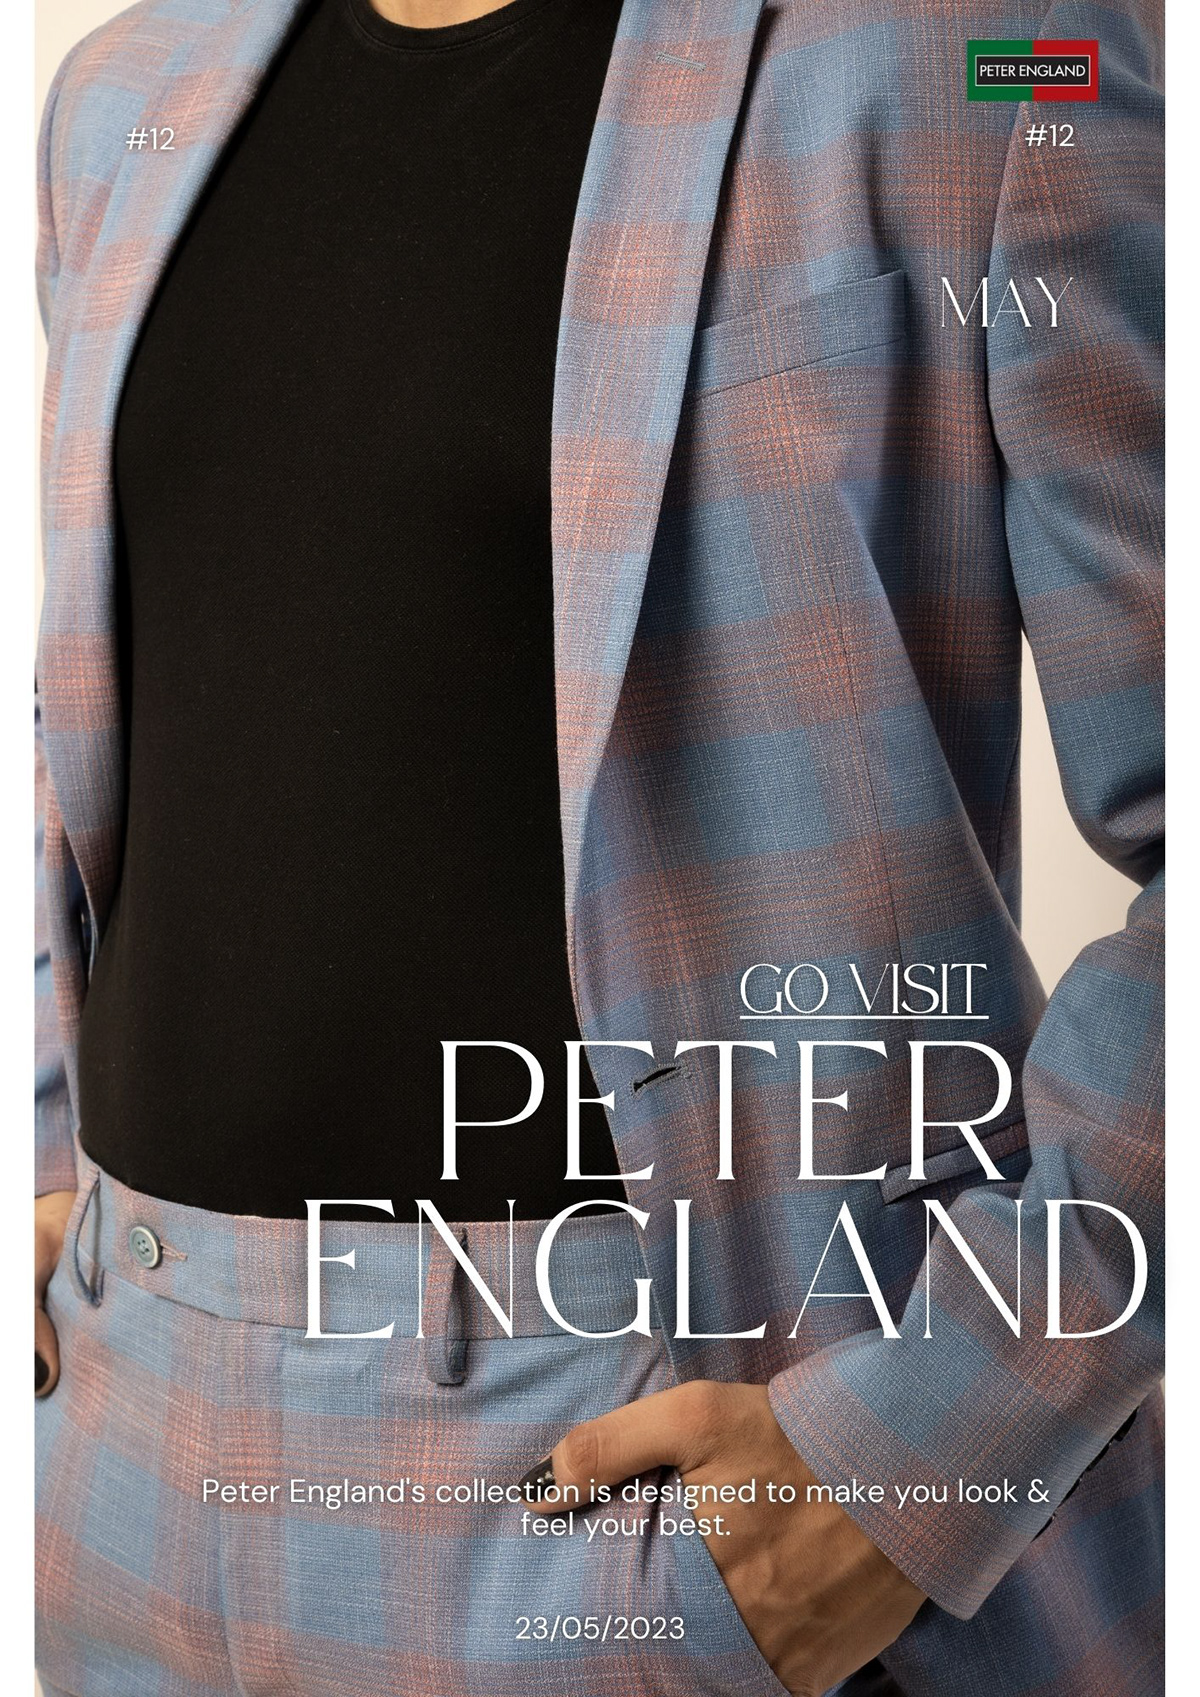 campaign brand identity Advertising  Peter england 